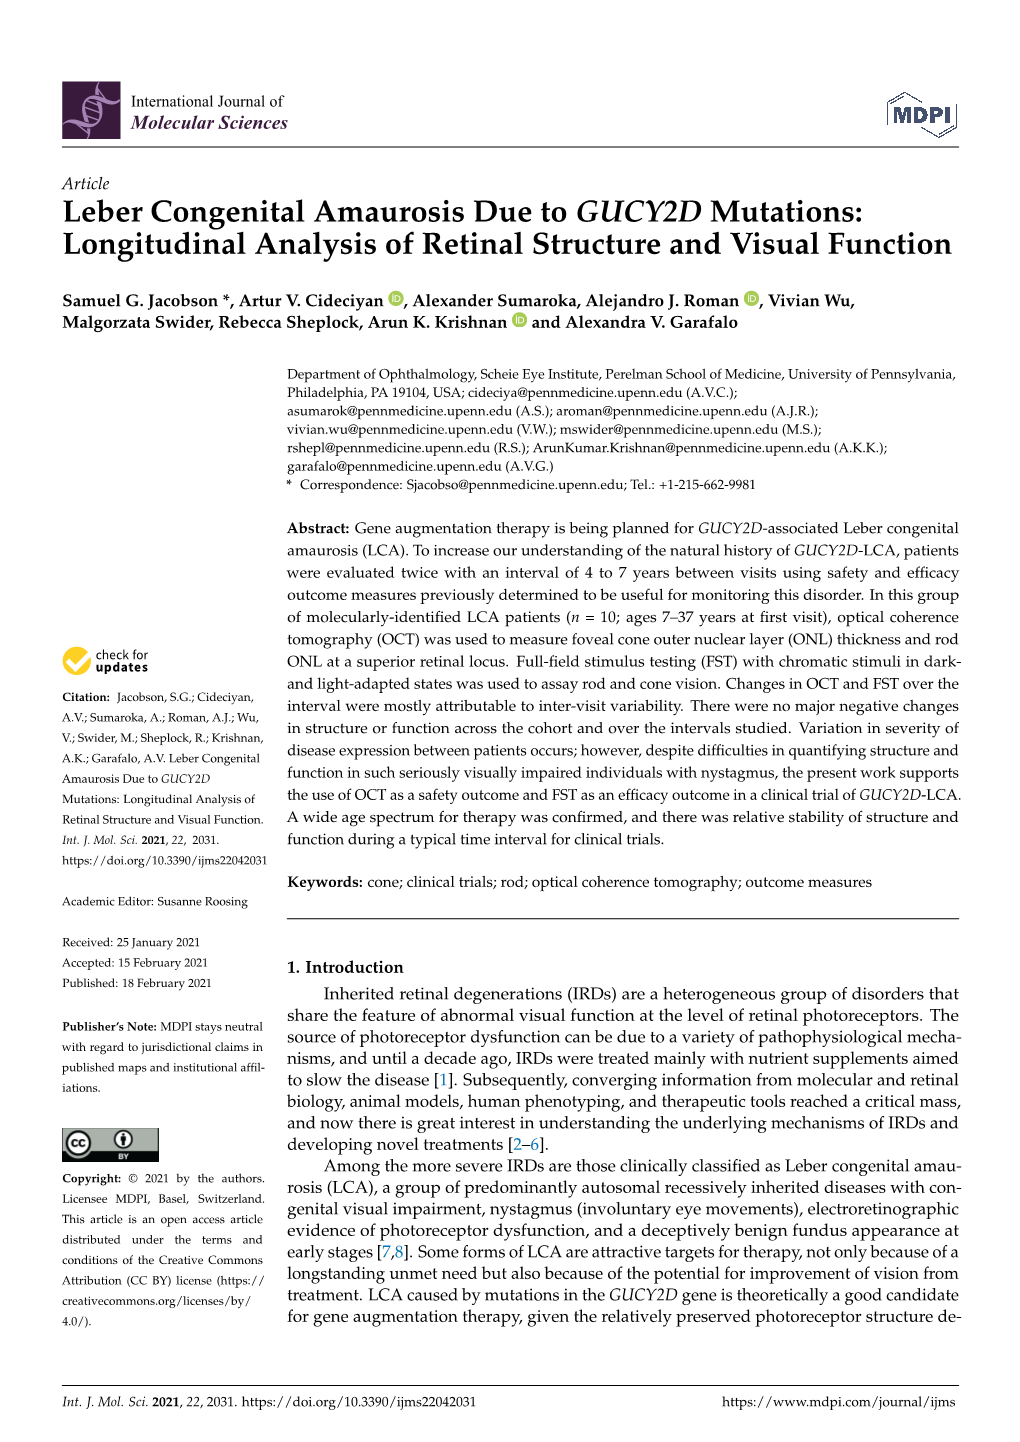 Leber Congenital Amaurosis Due to GUCY2D Mutations: Longitudinal Analysis of Retinal Structure and Visual Function